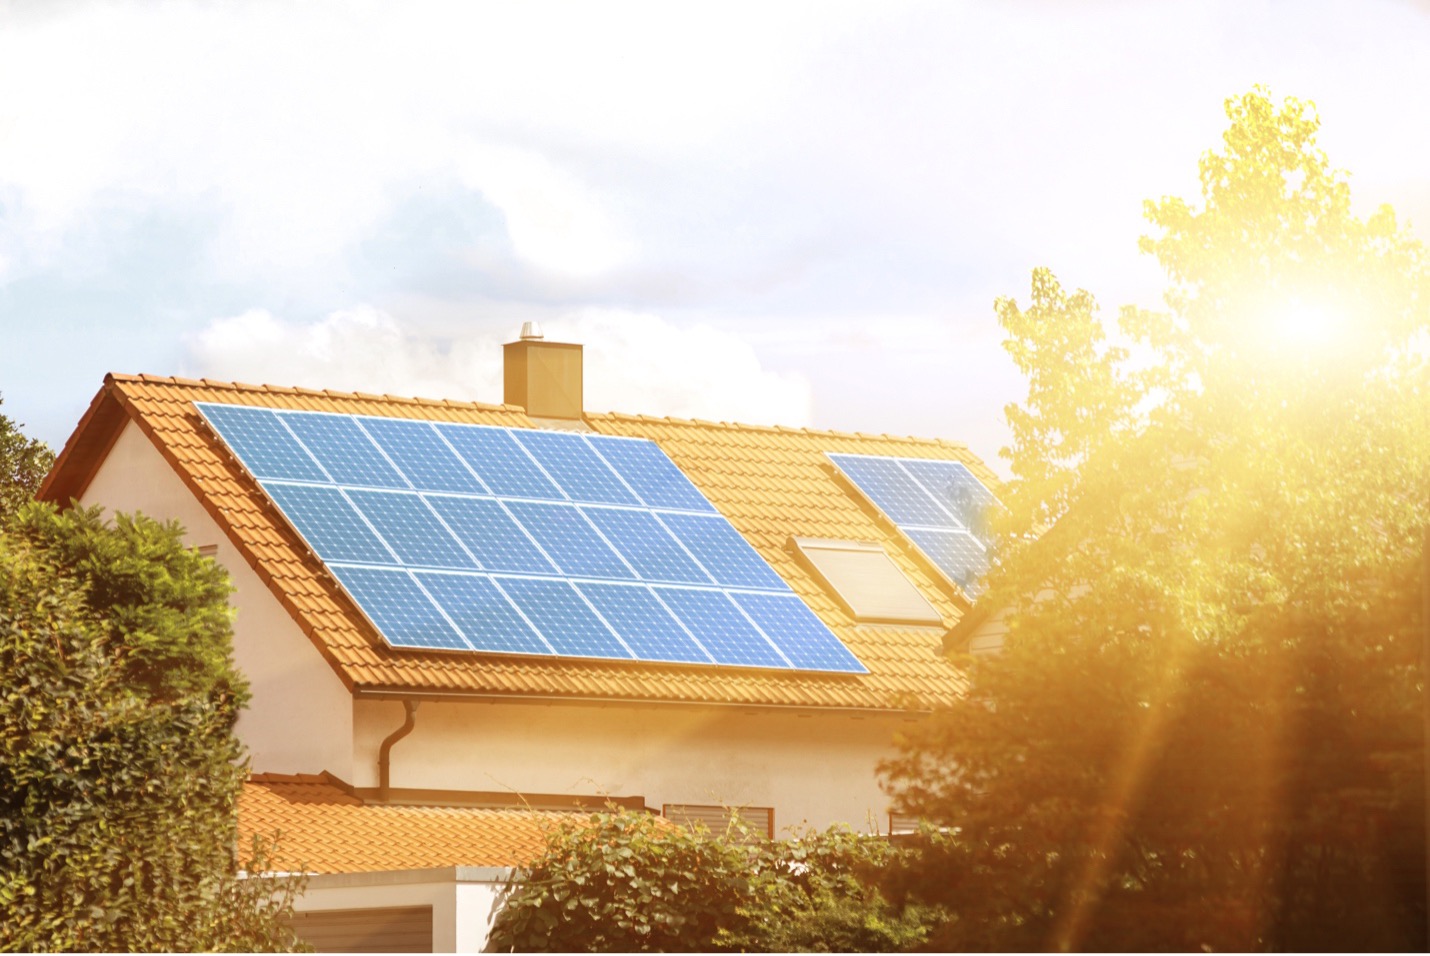 Read: Switch to Solar in 3 Easy Steps